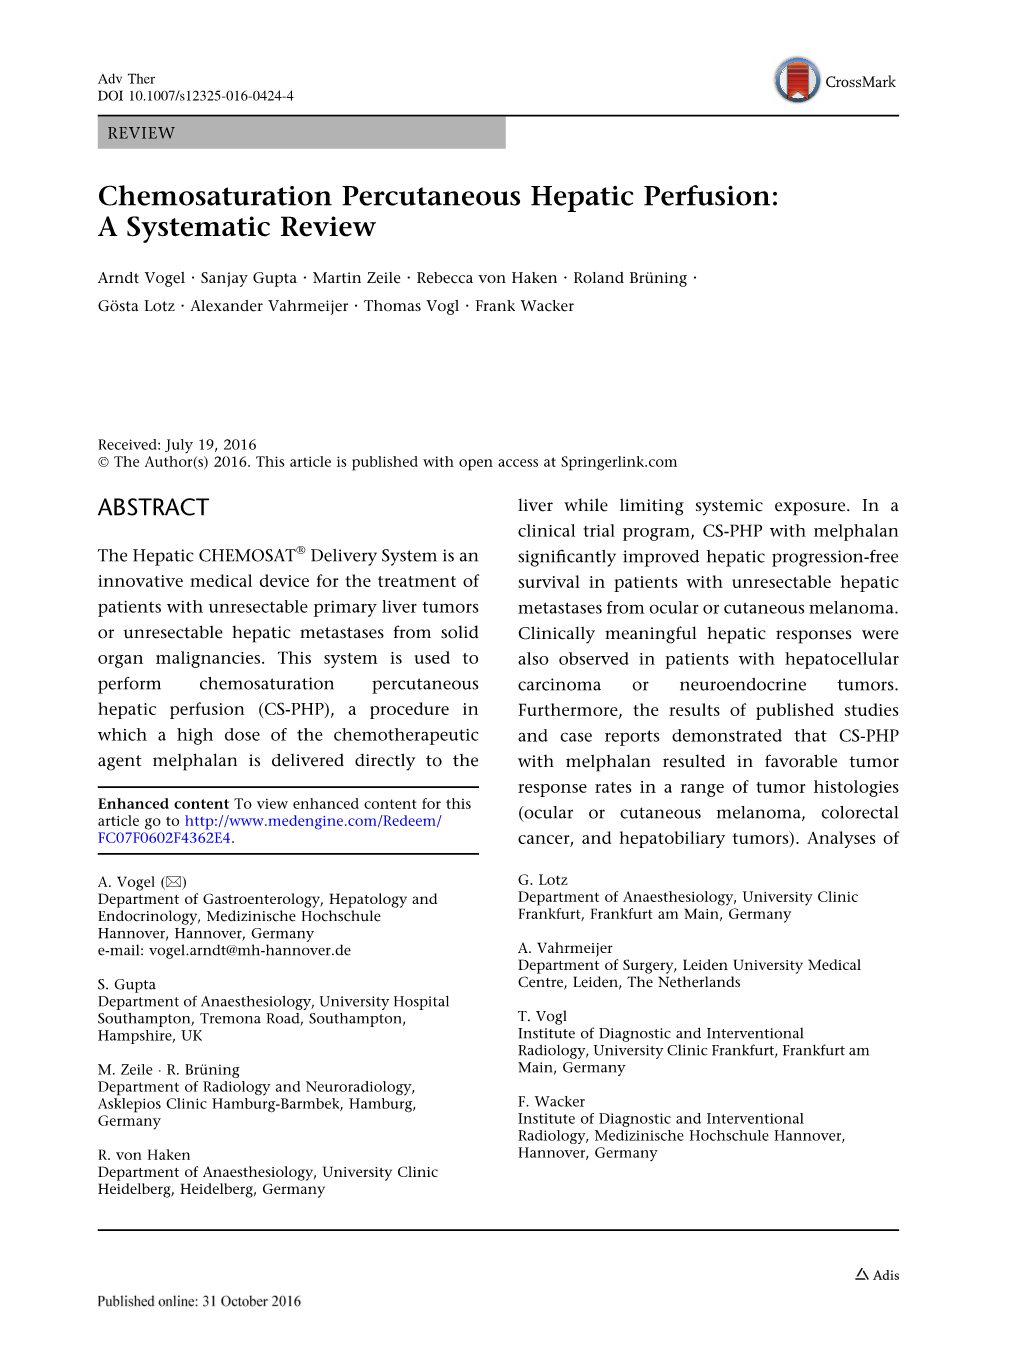 Chemosaturation Percutaneous Hepatic Perfusion: a Systematic Review